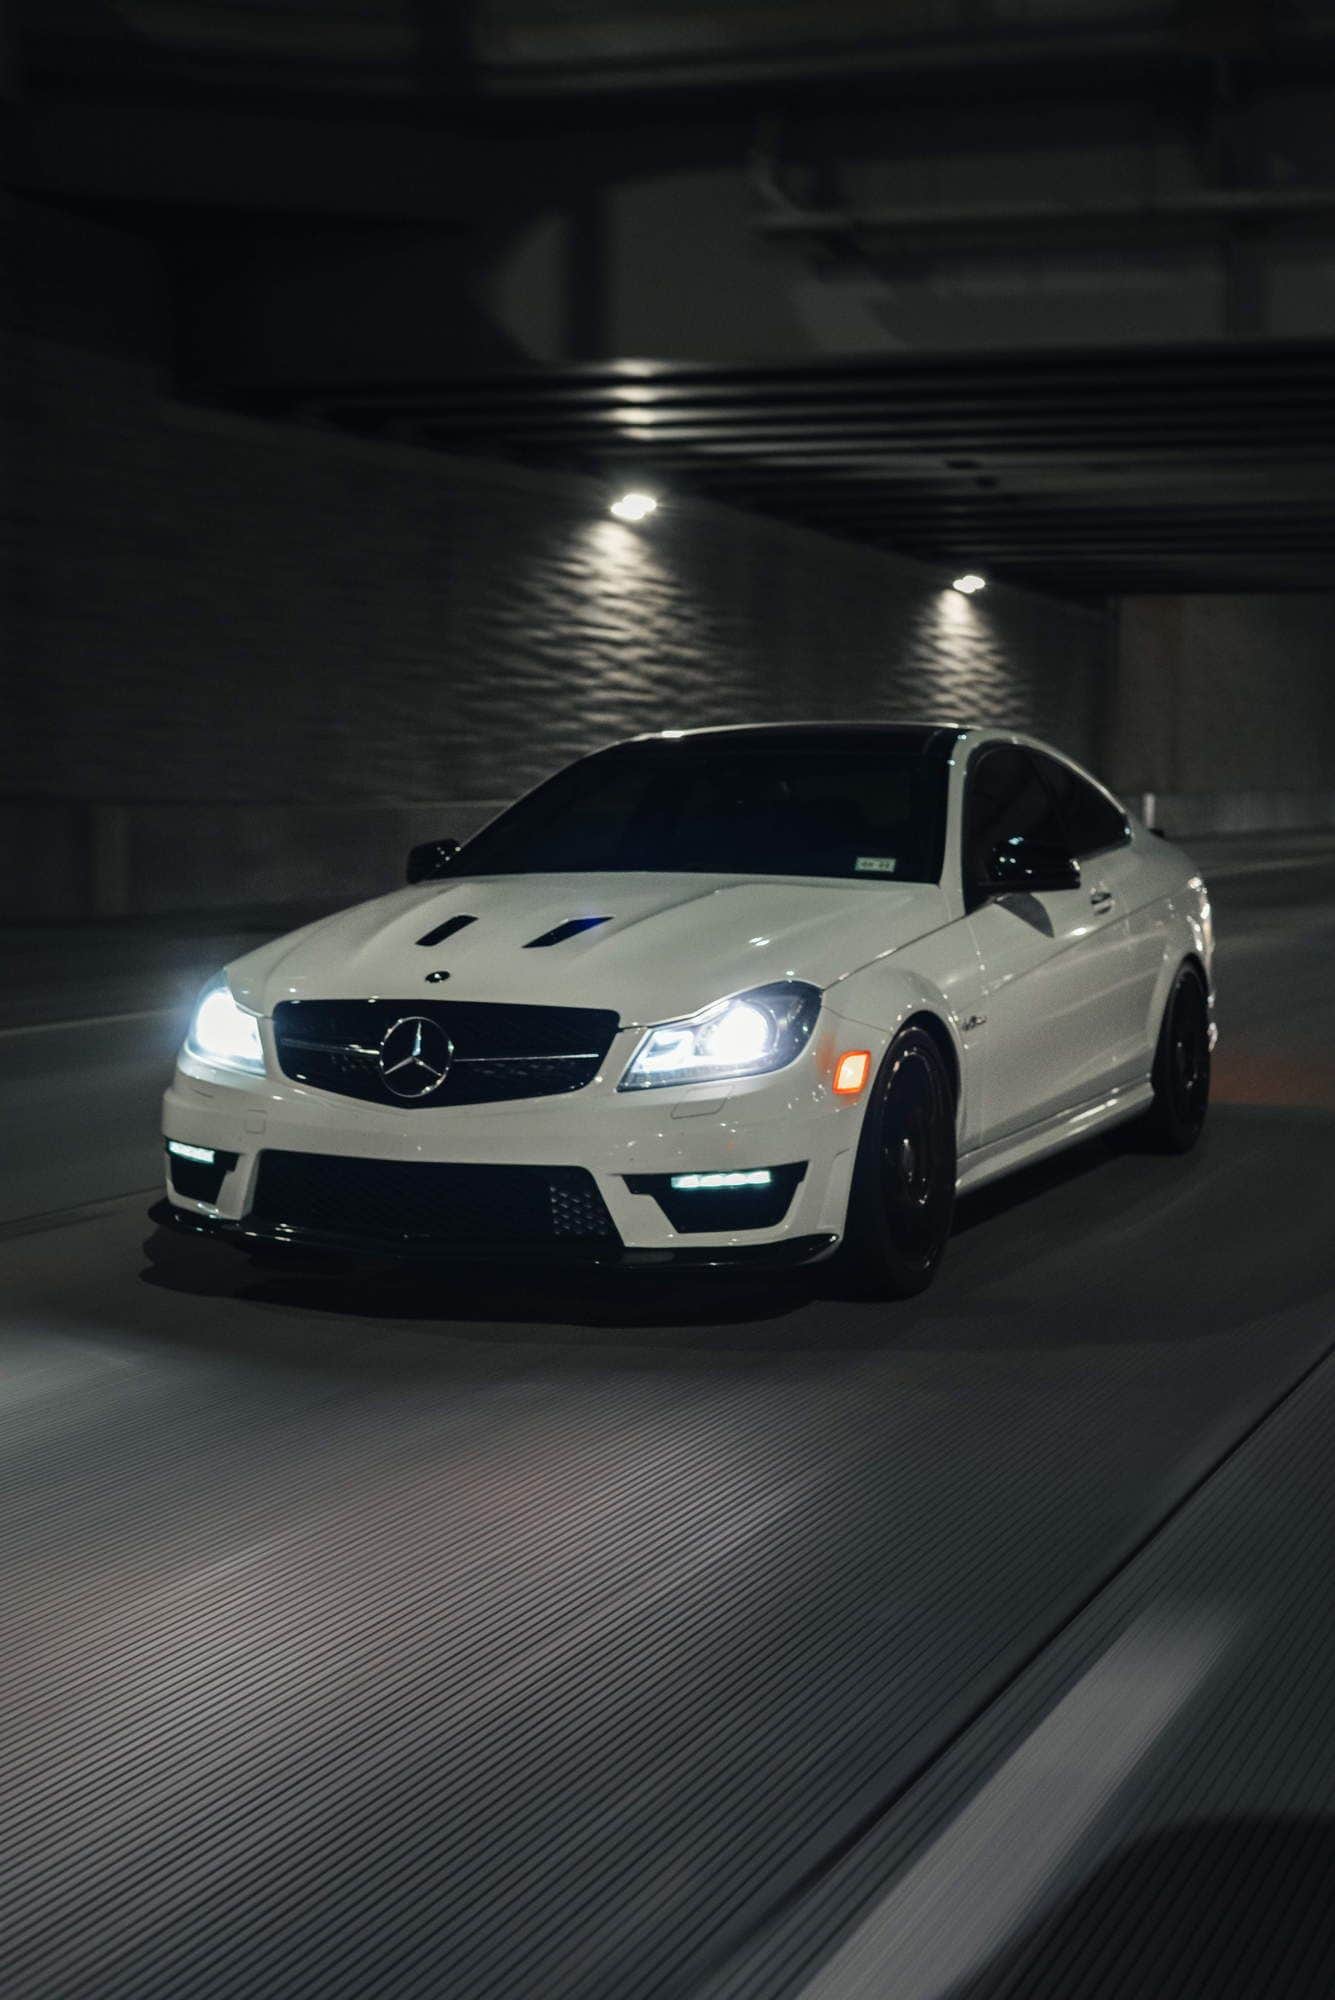 2014 Mercedes-Benz C63 AMG - FIRE-BREATHING C63 507 FOR SALE - Used - Chicago, IL 60604, United States